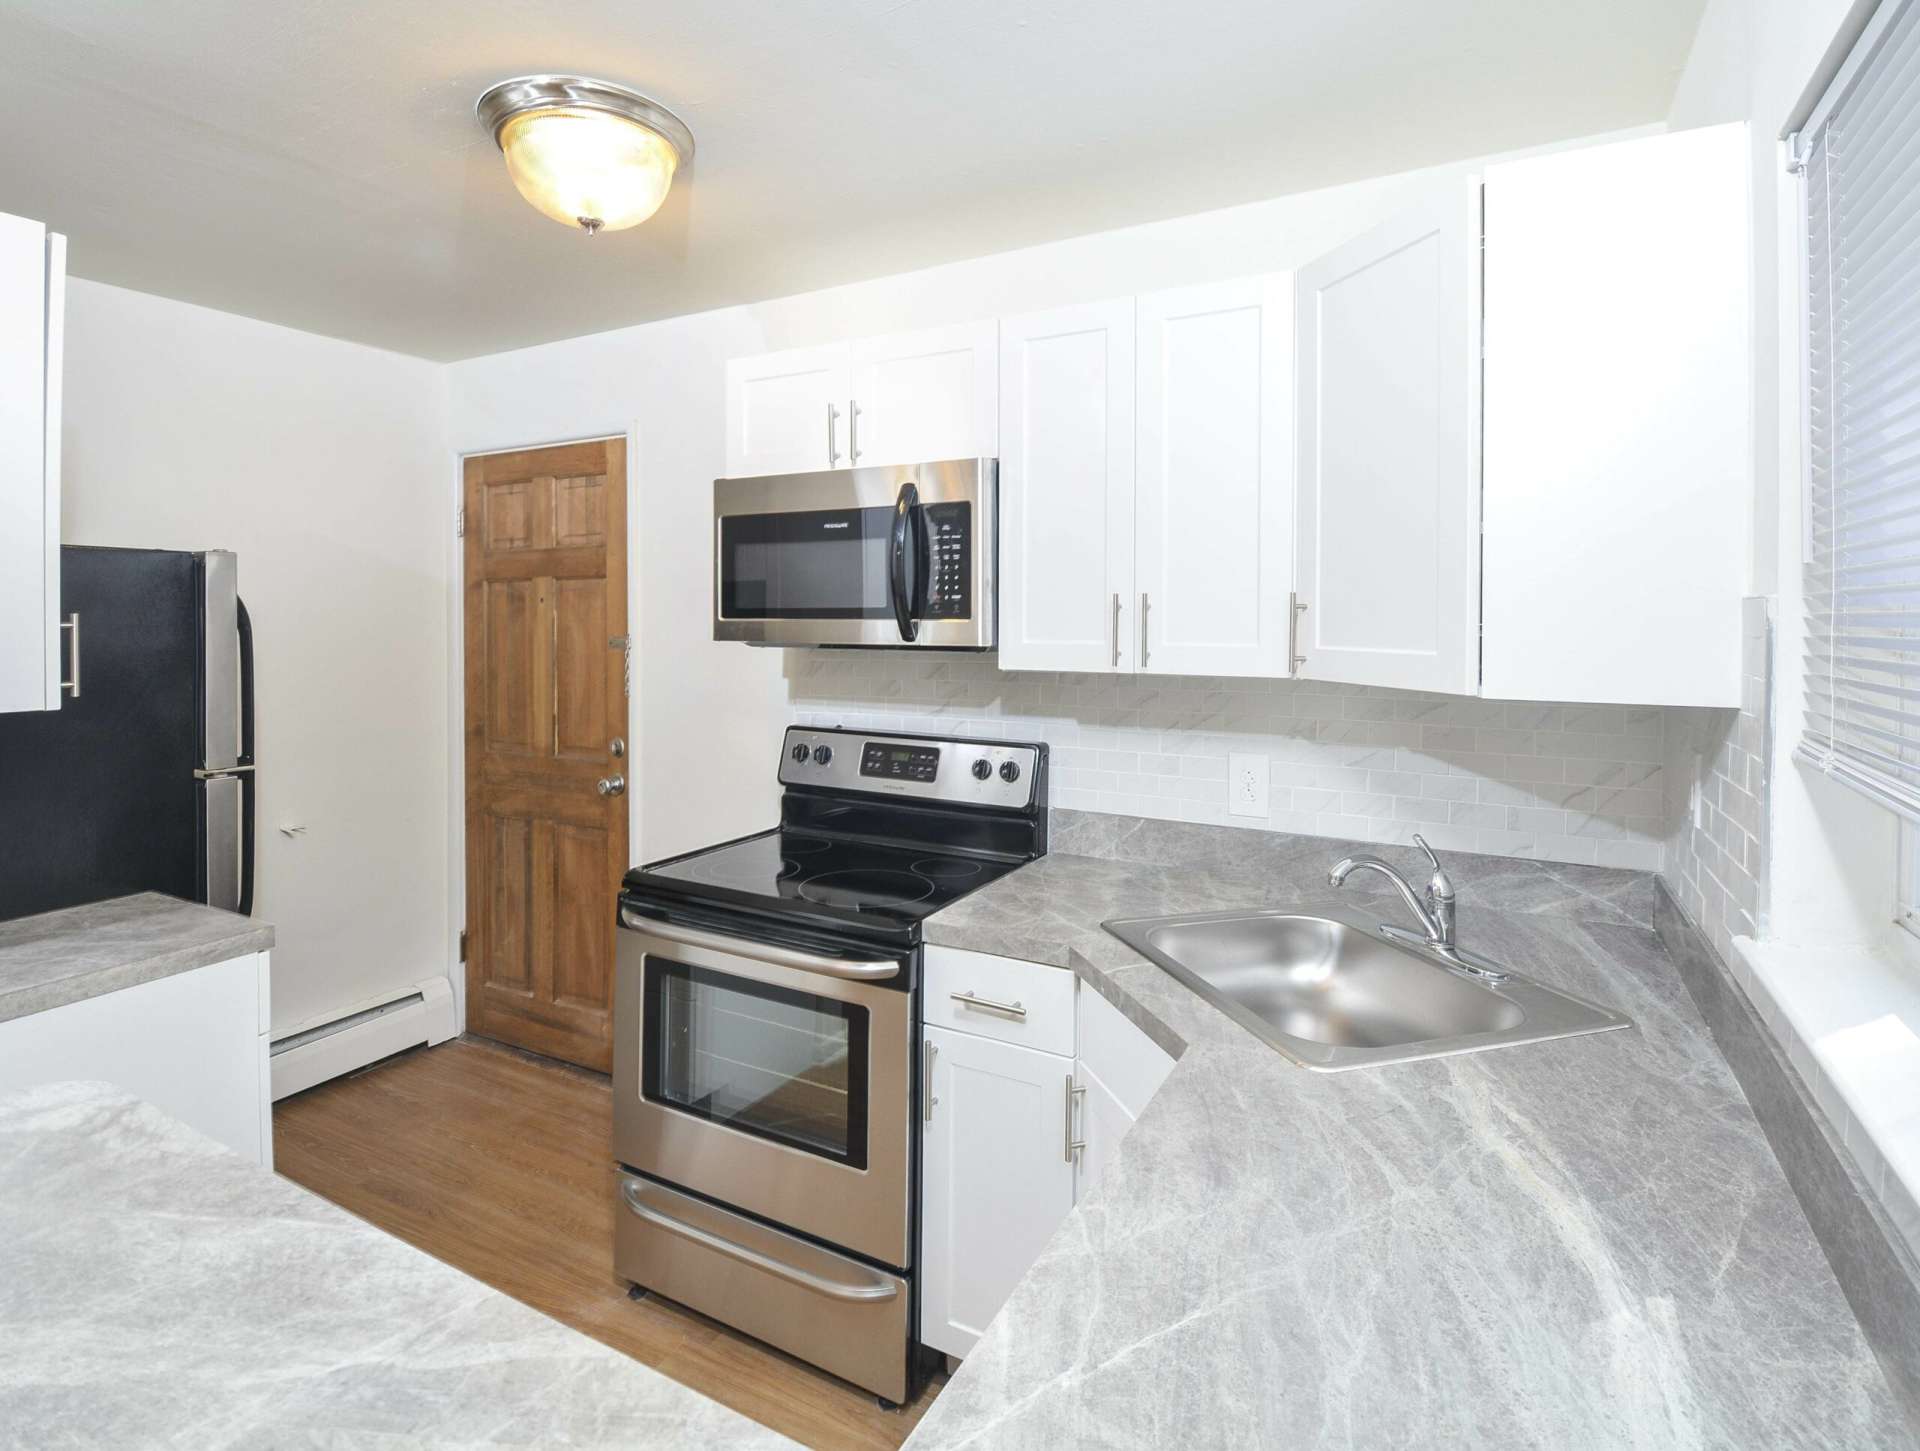 Kitchen with white cabinets, stainless steel appliances, and hardwood flooring.